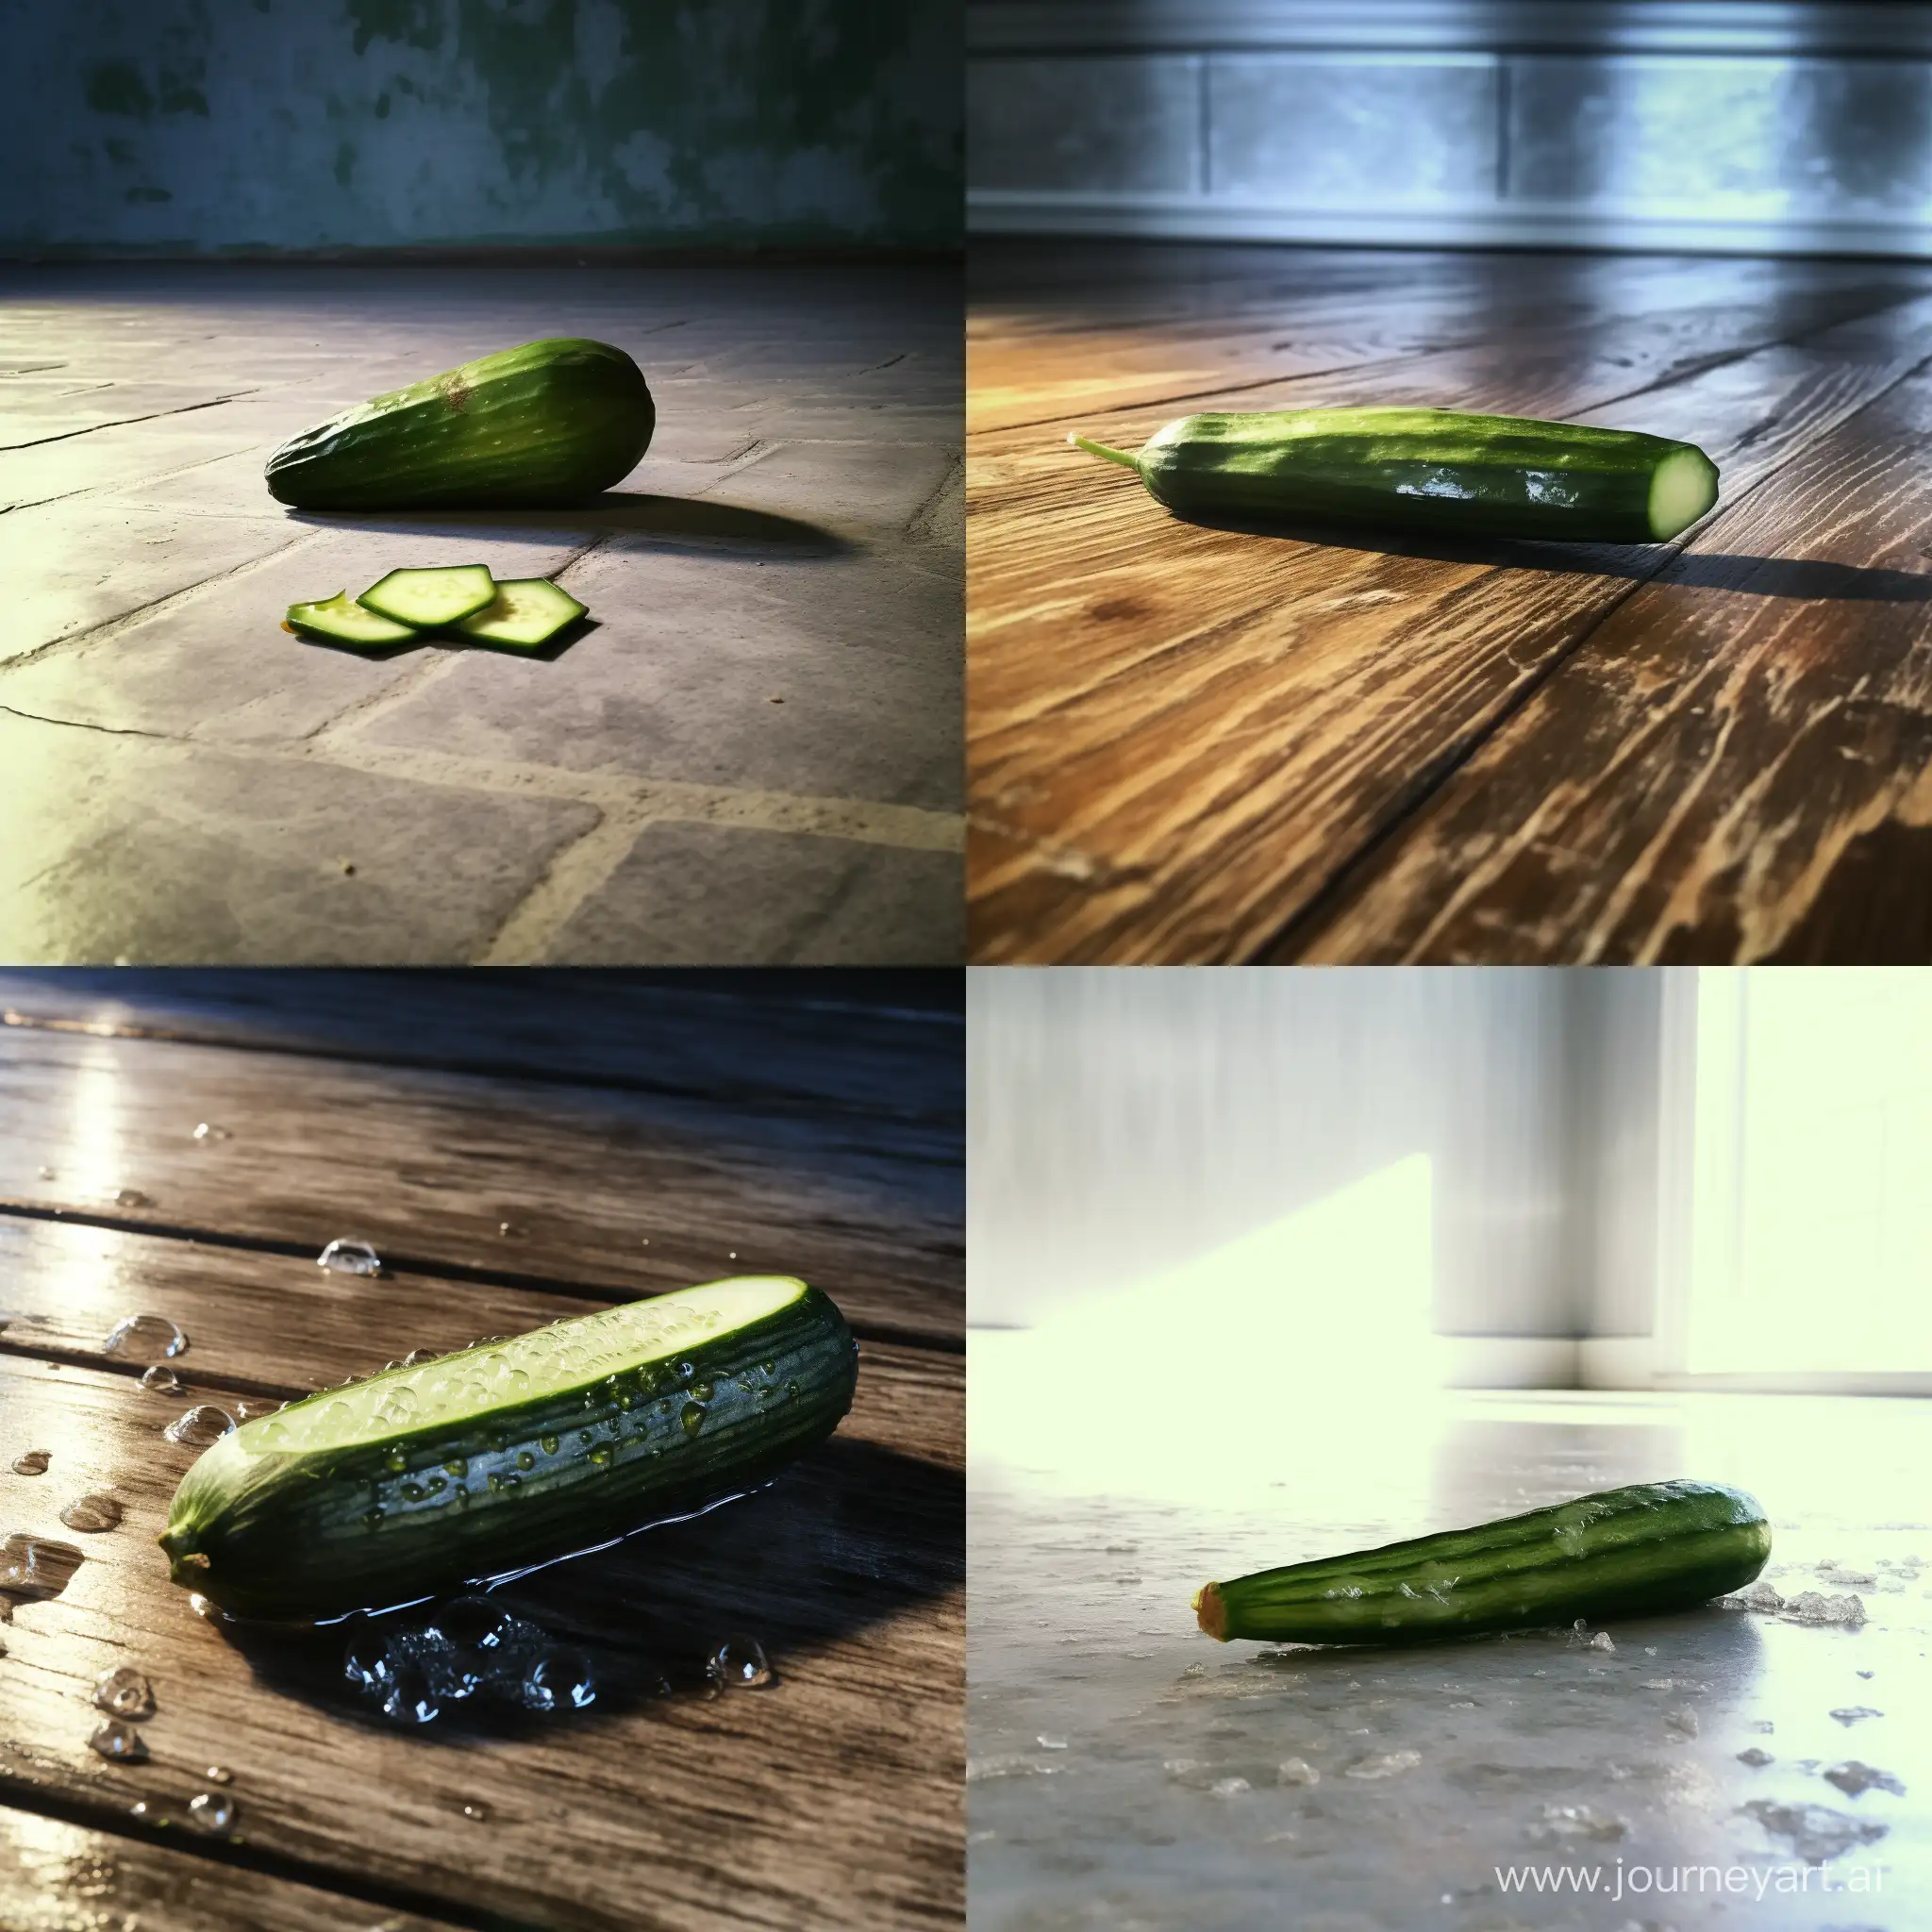 Lonely-Untouched-Cucumber-on-the-Floor-Salty-Pickle-Still-Life